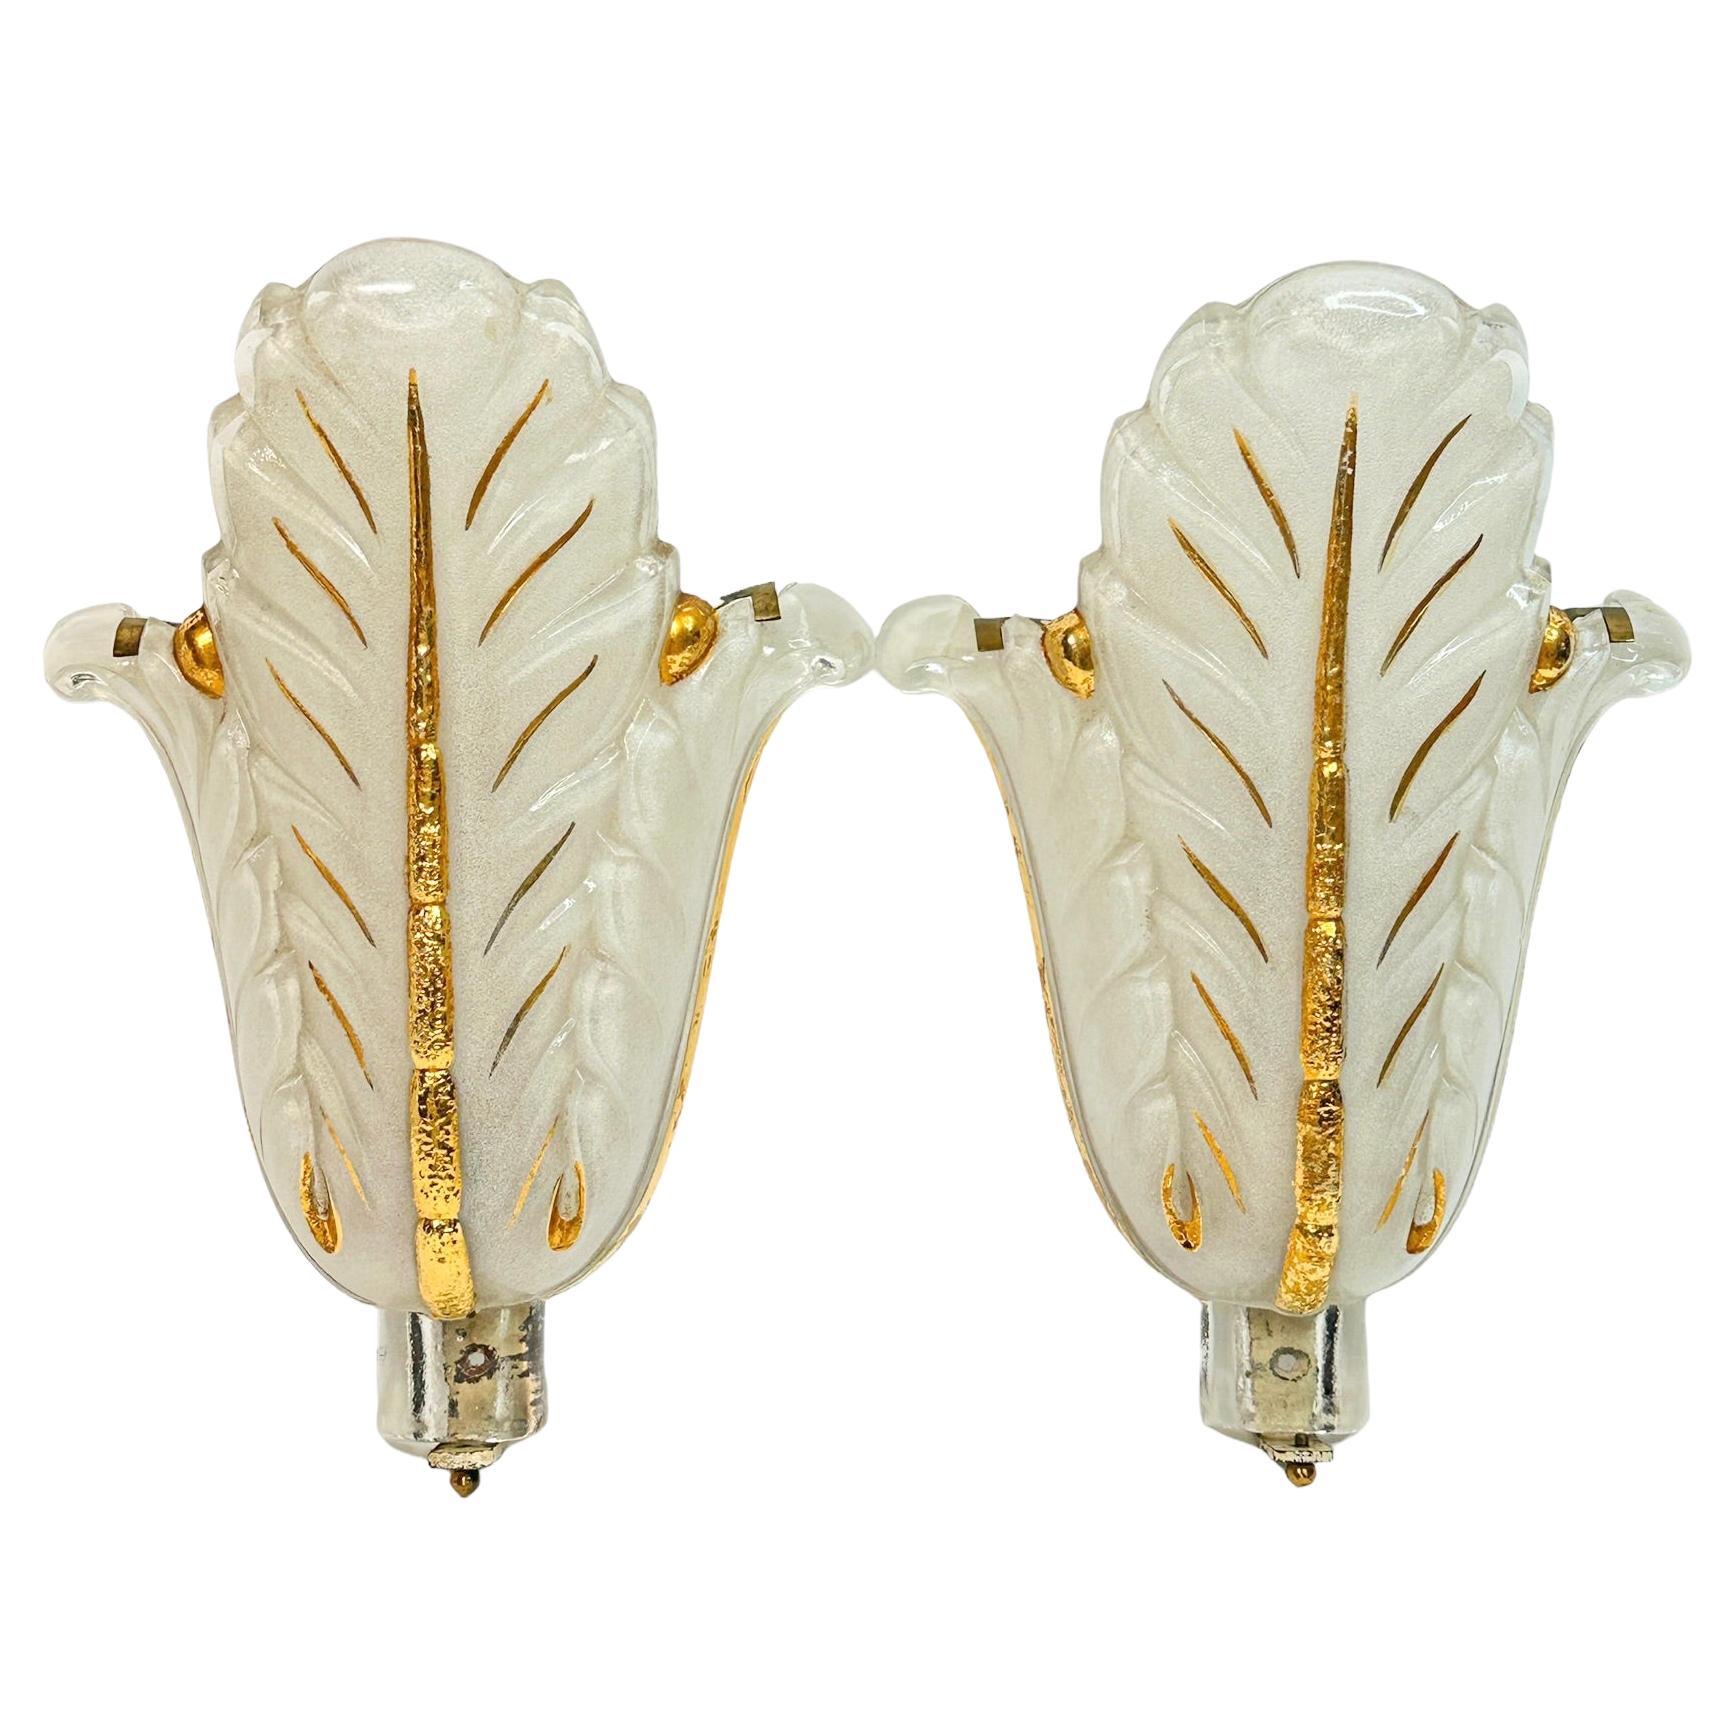 Pair of Jean Gauthier Art Deco Glass Sconces 1930s French